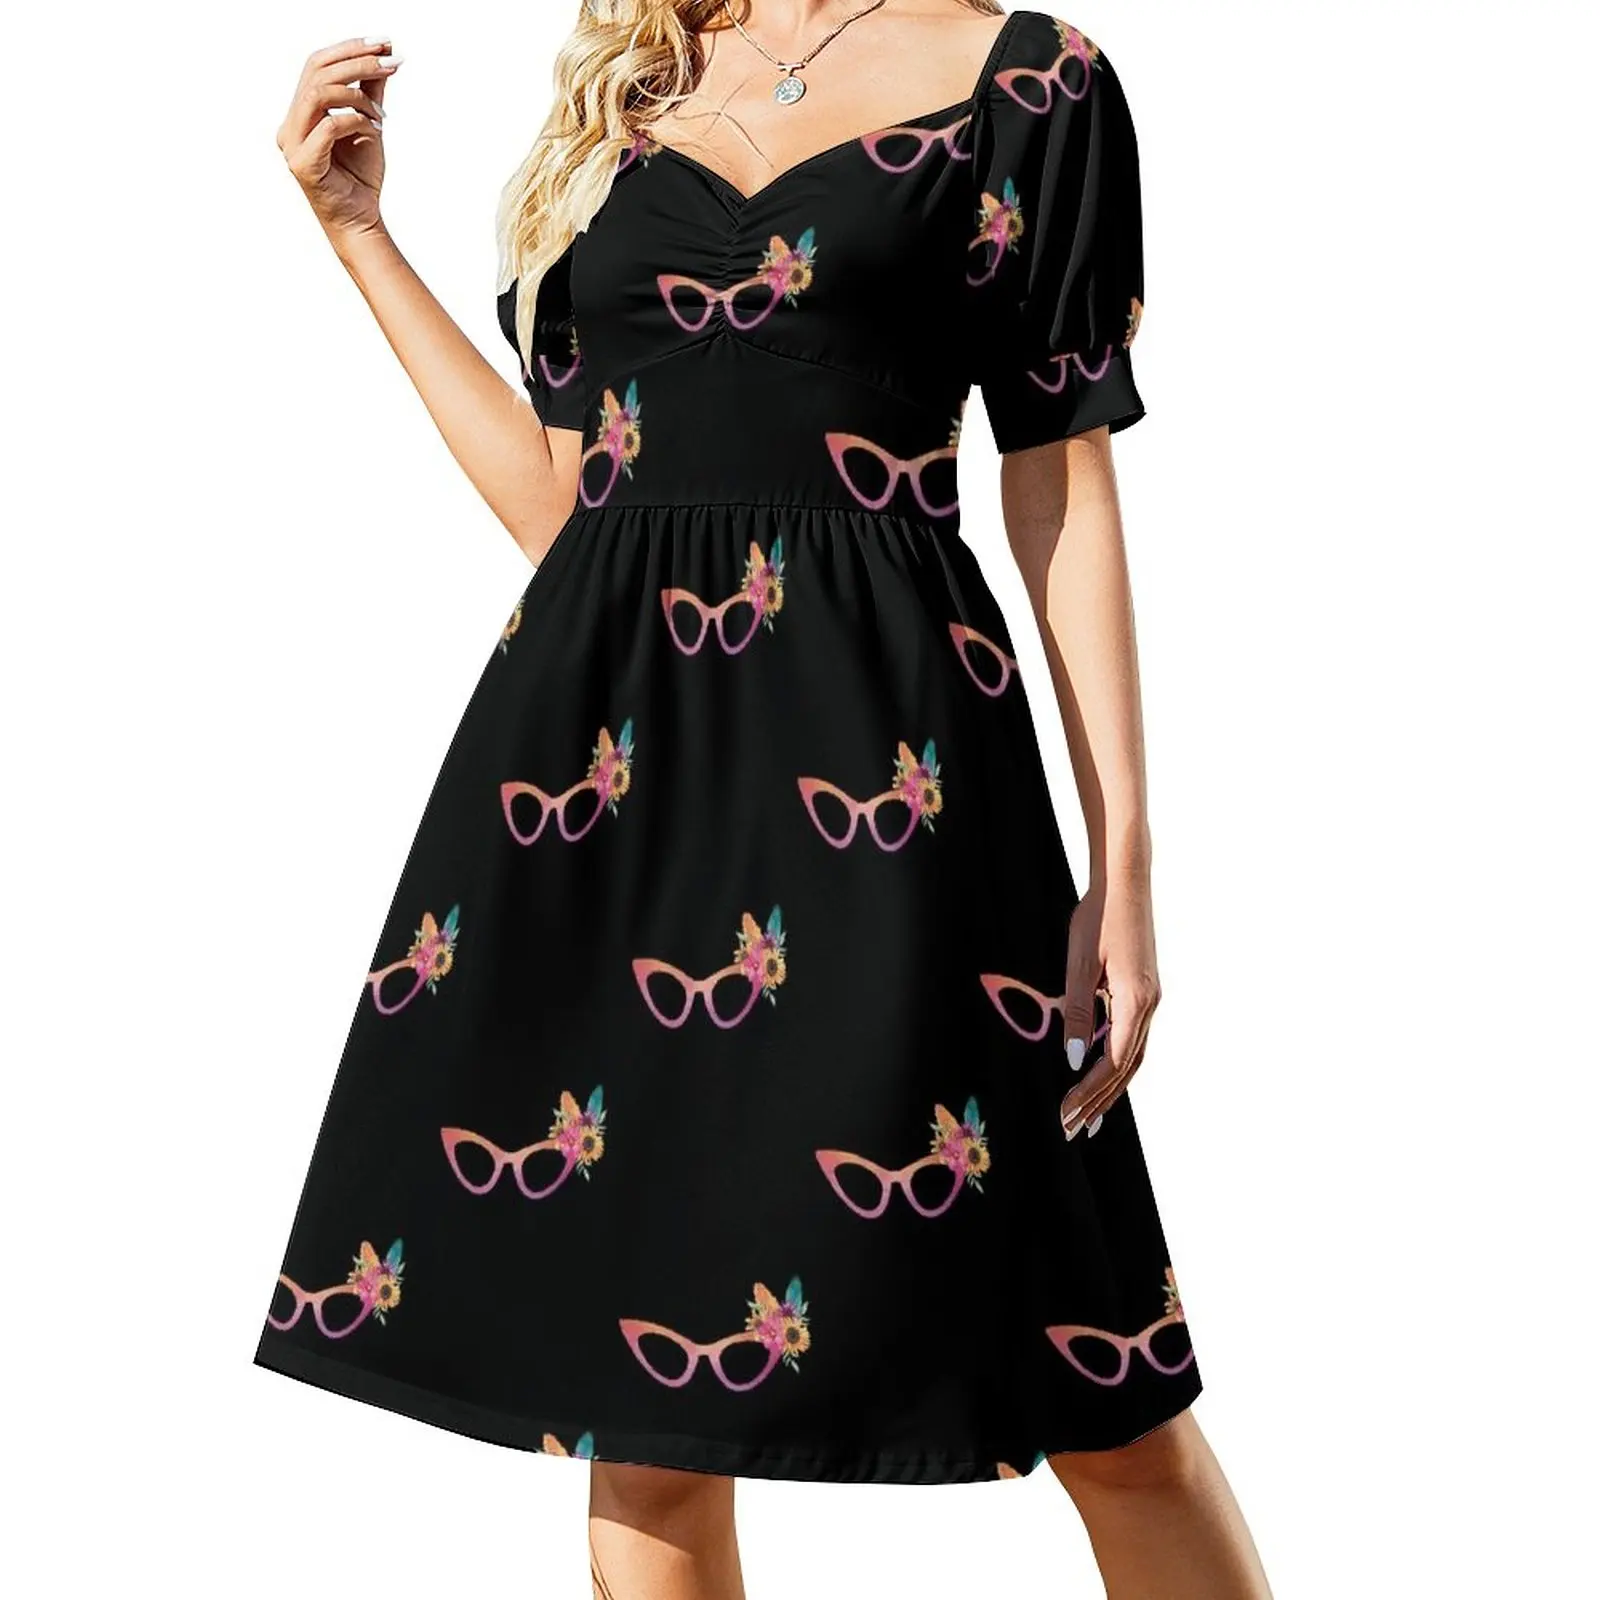 

Cat Eyeglasses With A Floral And Feather Bouquet Sleeveless Dress fairy dress elegant dresses for women